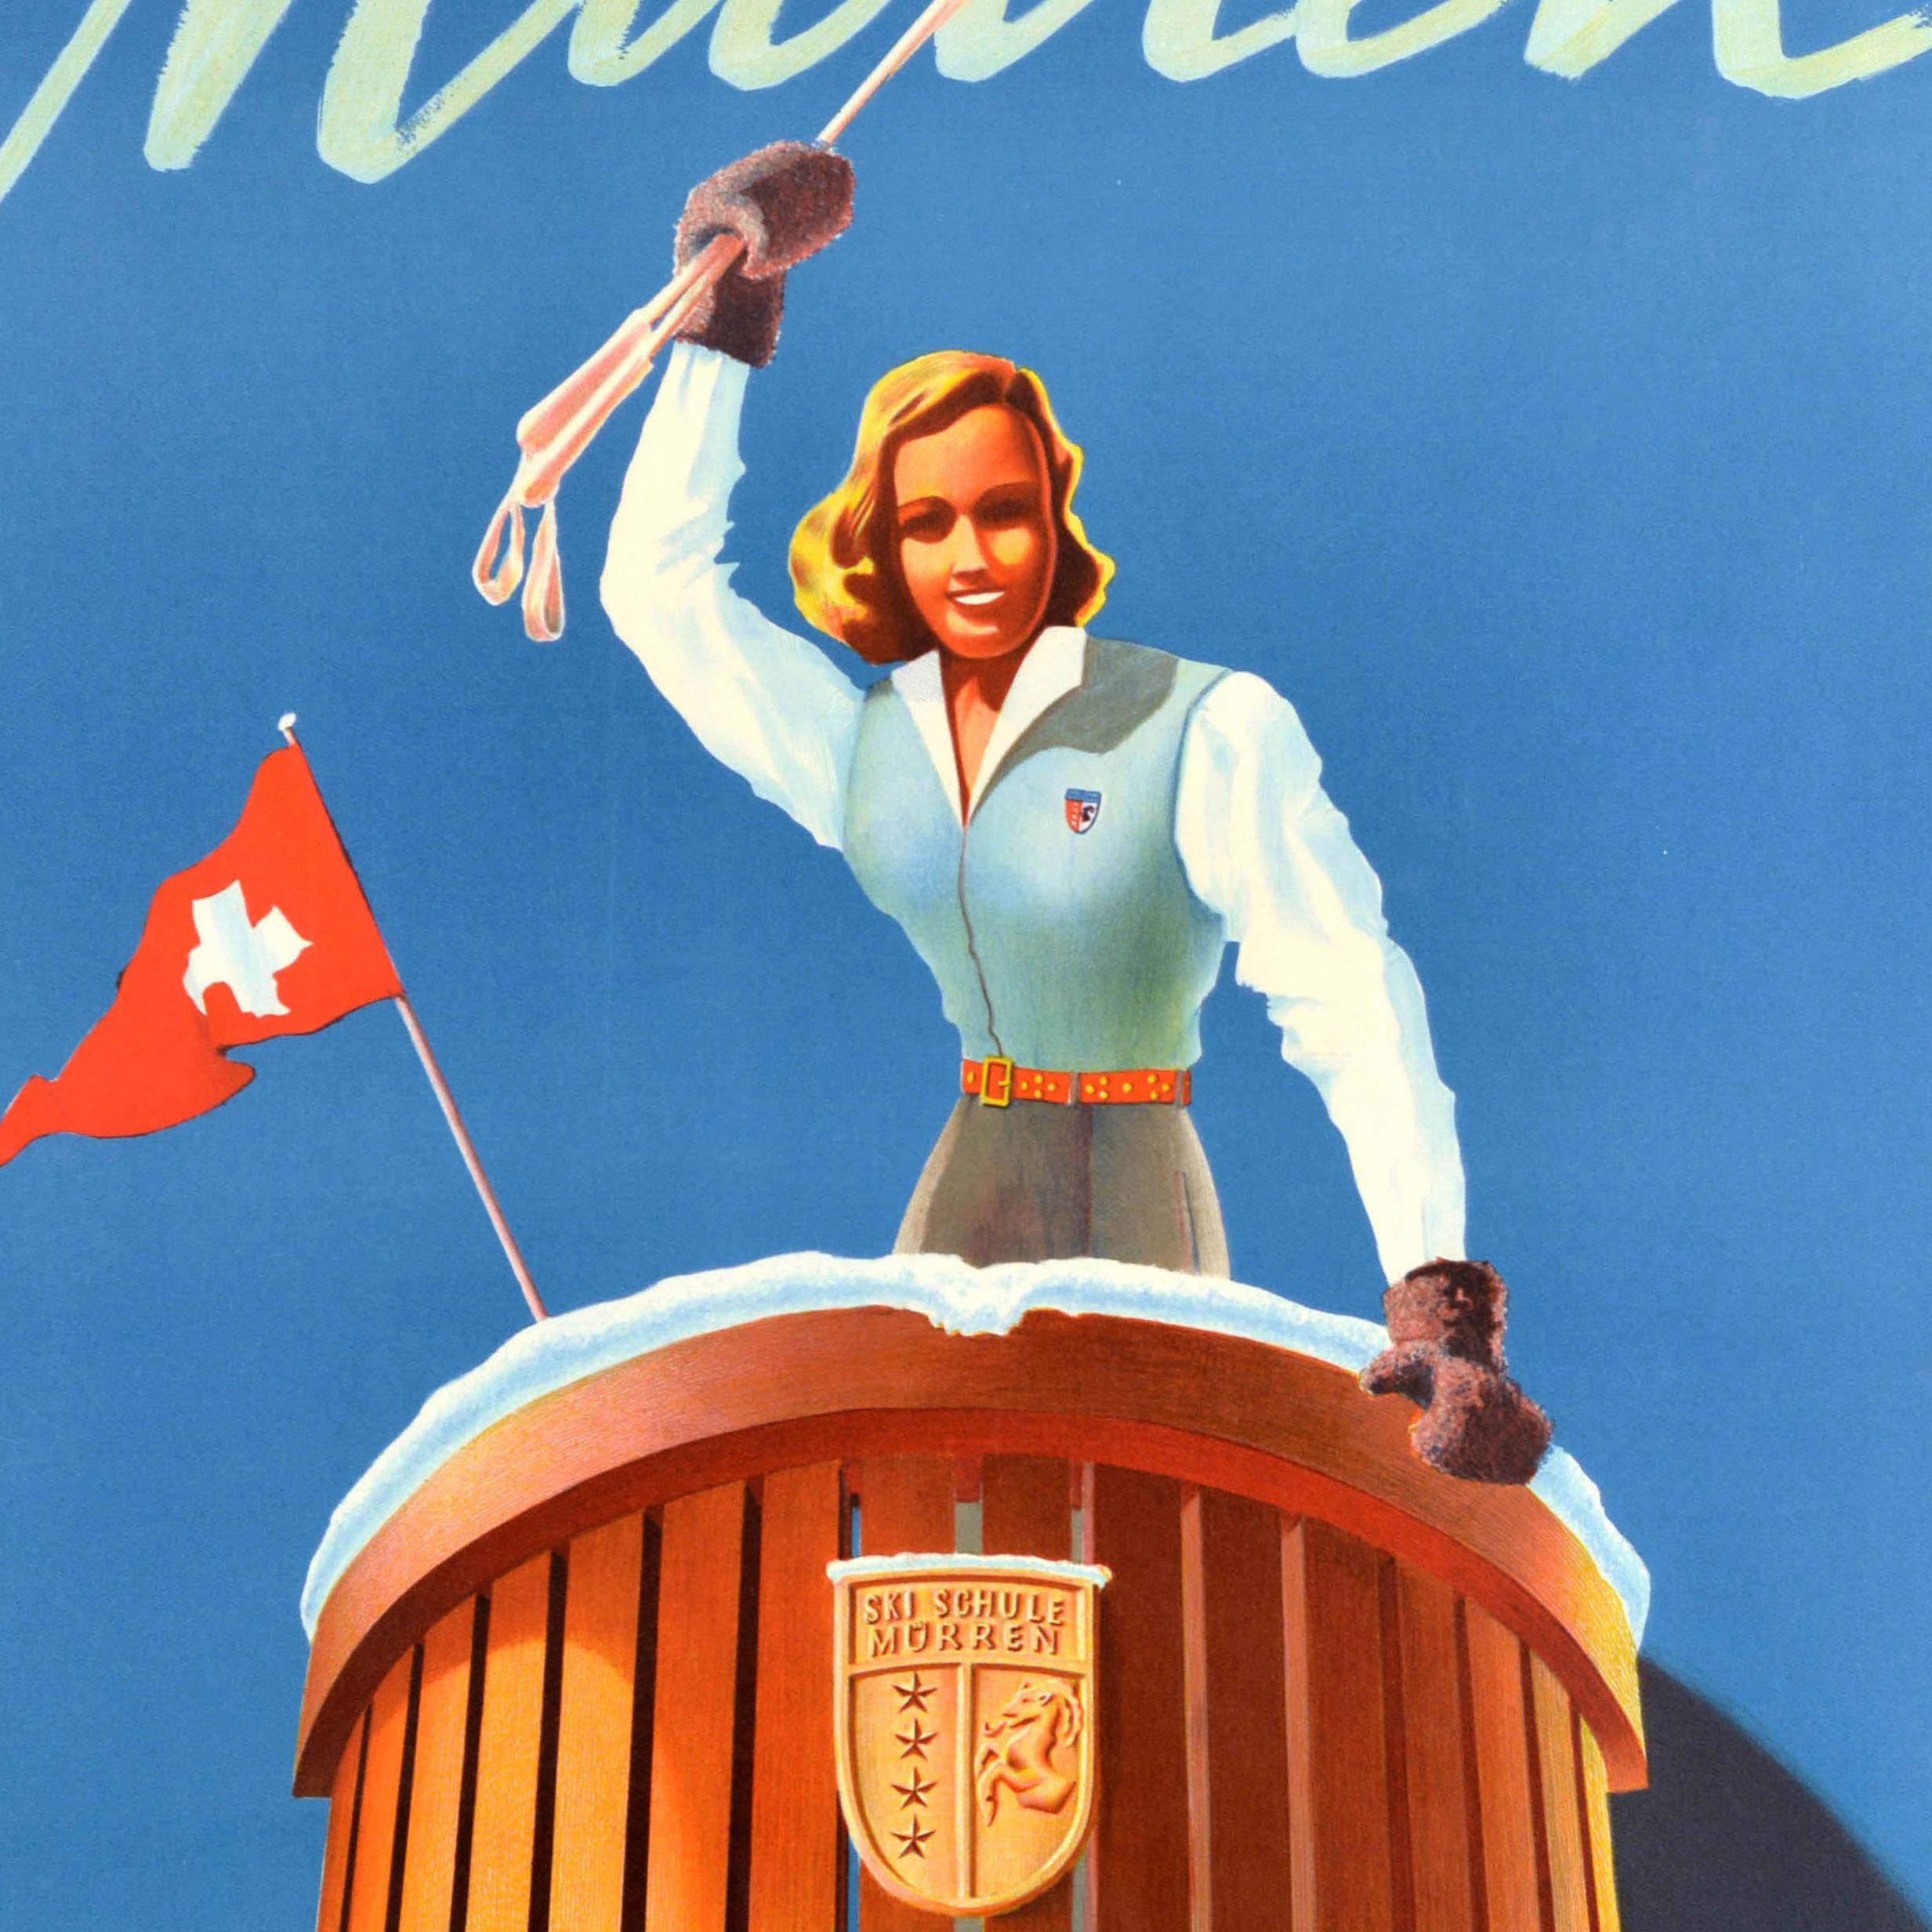 Original vintage winter sport travel poster for the Kandahar Ski School in Murren Kandahar with the slogan - Its sun terrace is waiting for you / Seine Sonnenterrasse wartet auf Sie - featuring an image of a smiling lady holding up her ski poles in